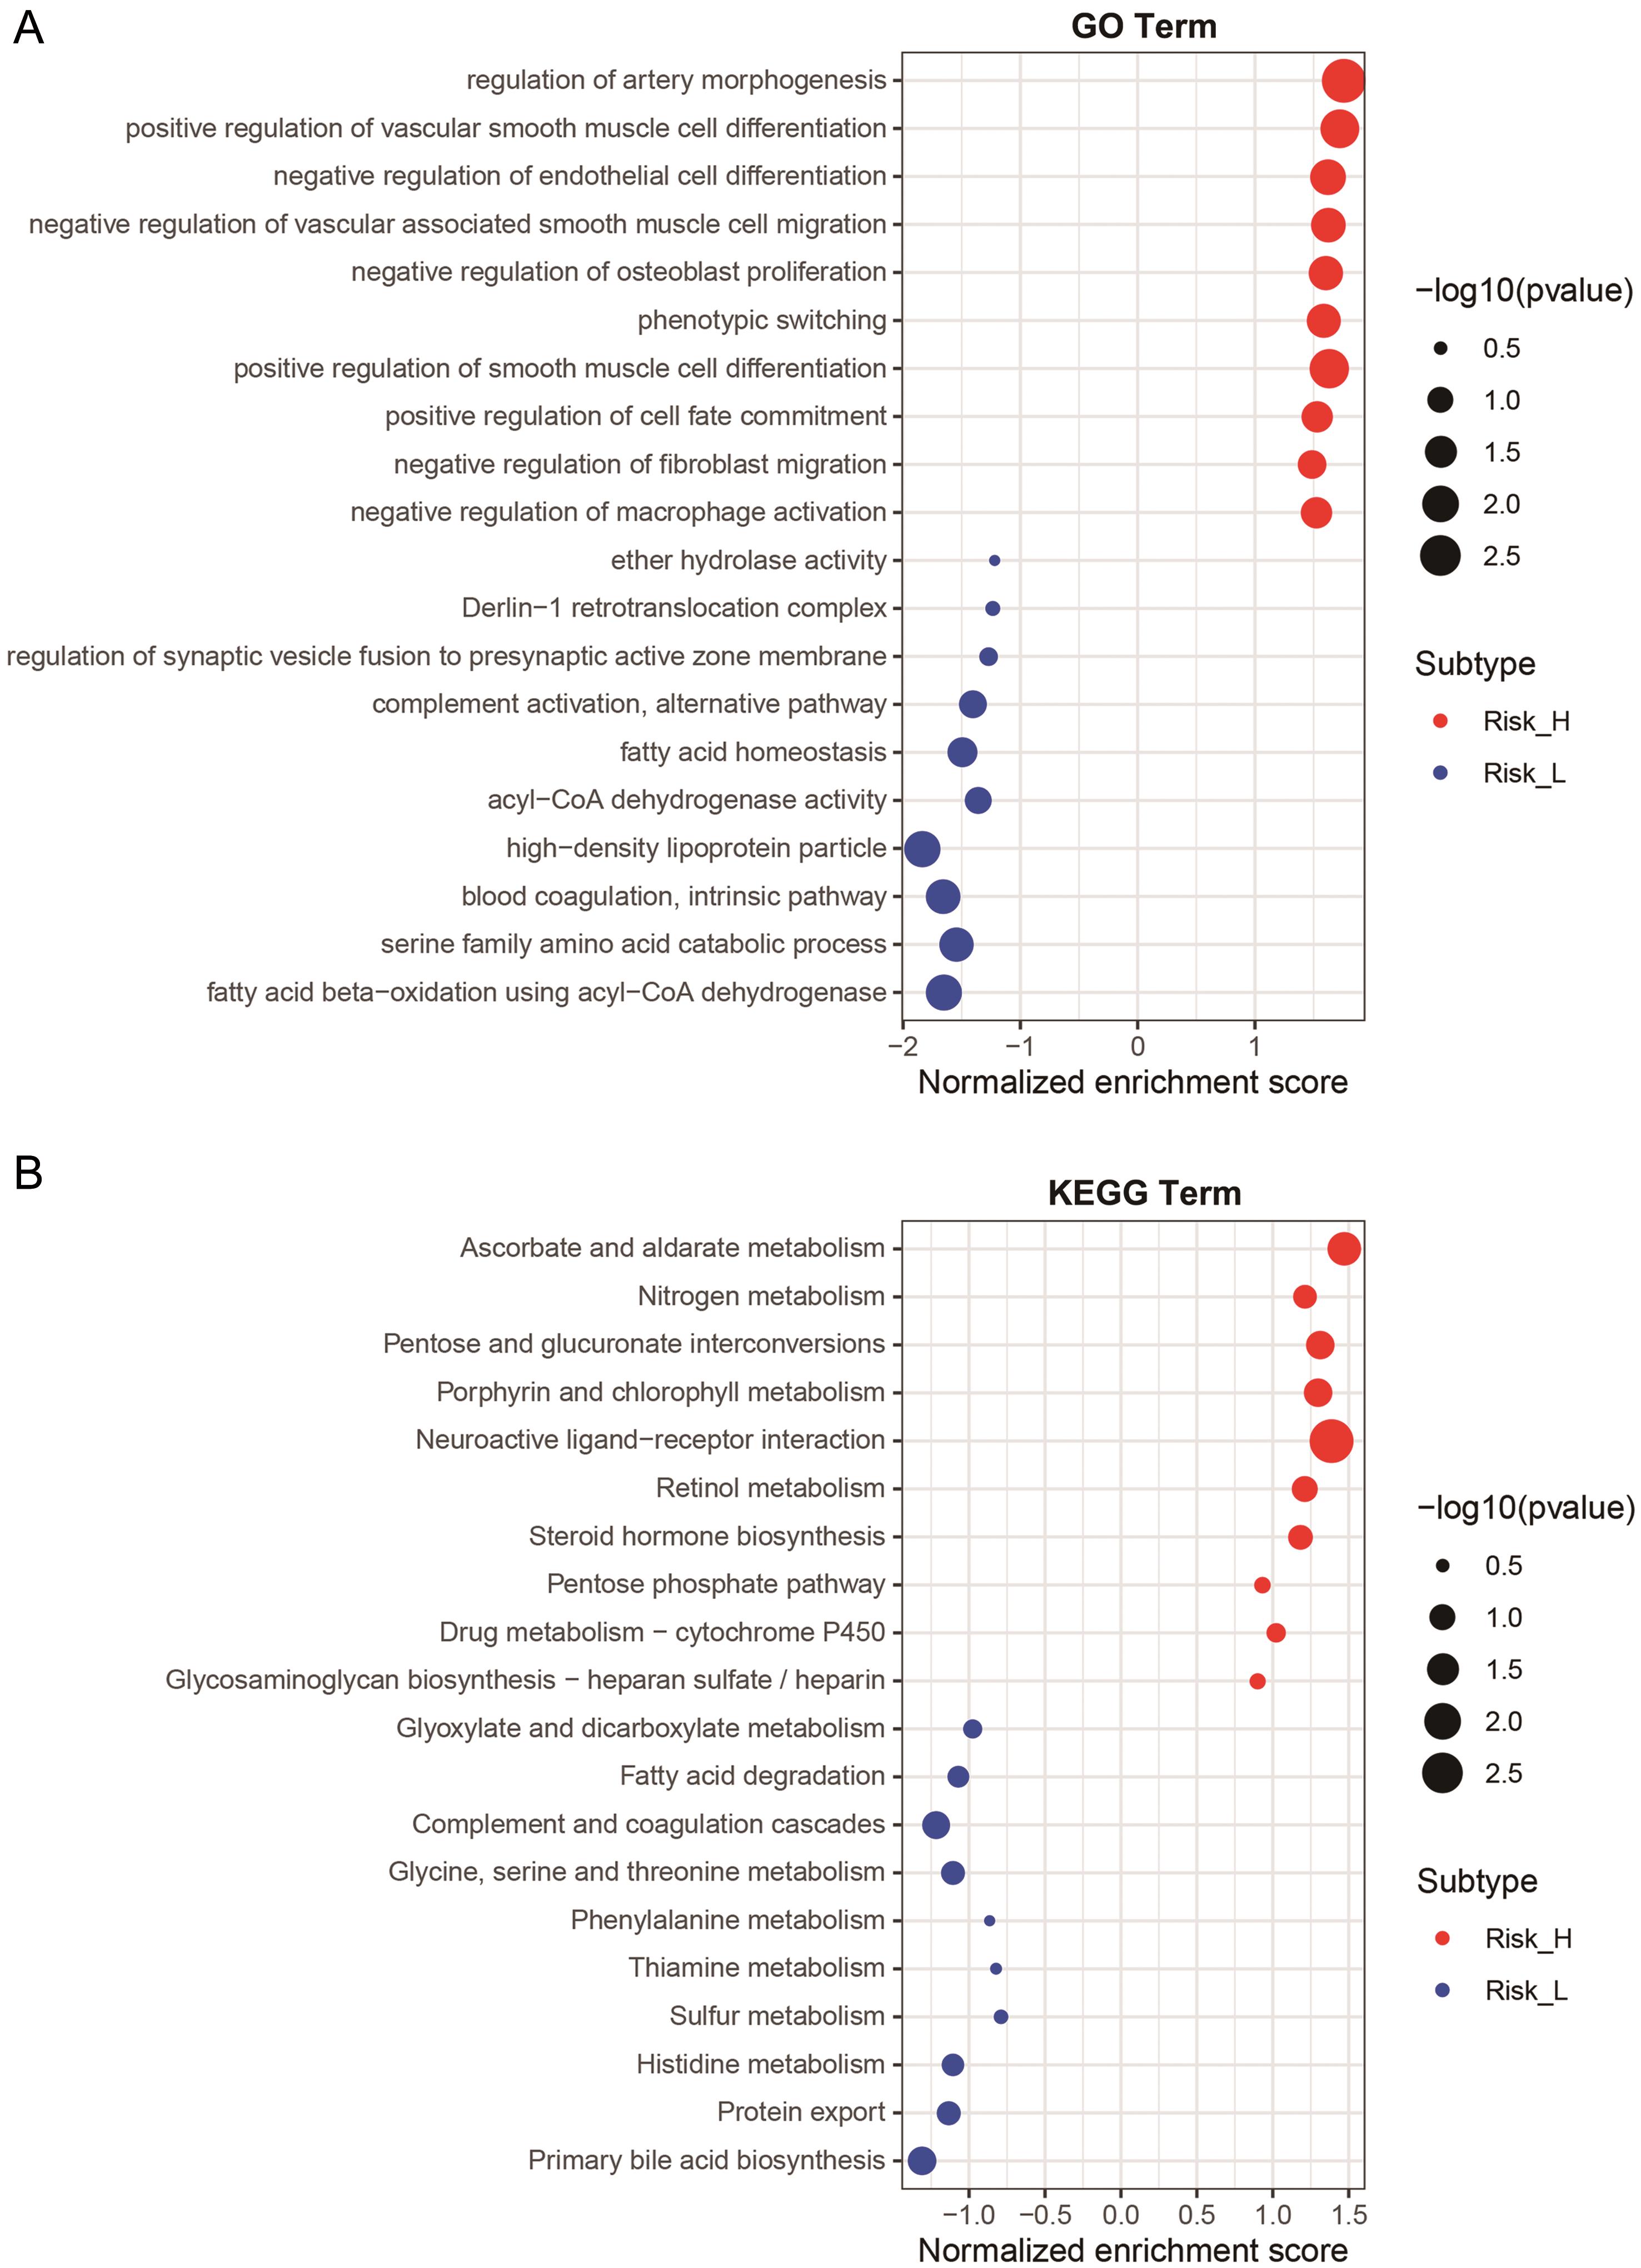 Differences in biological functions and pathways between hepatocellular carcinoma patients the high- and low-risk scores.